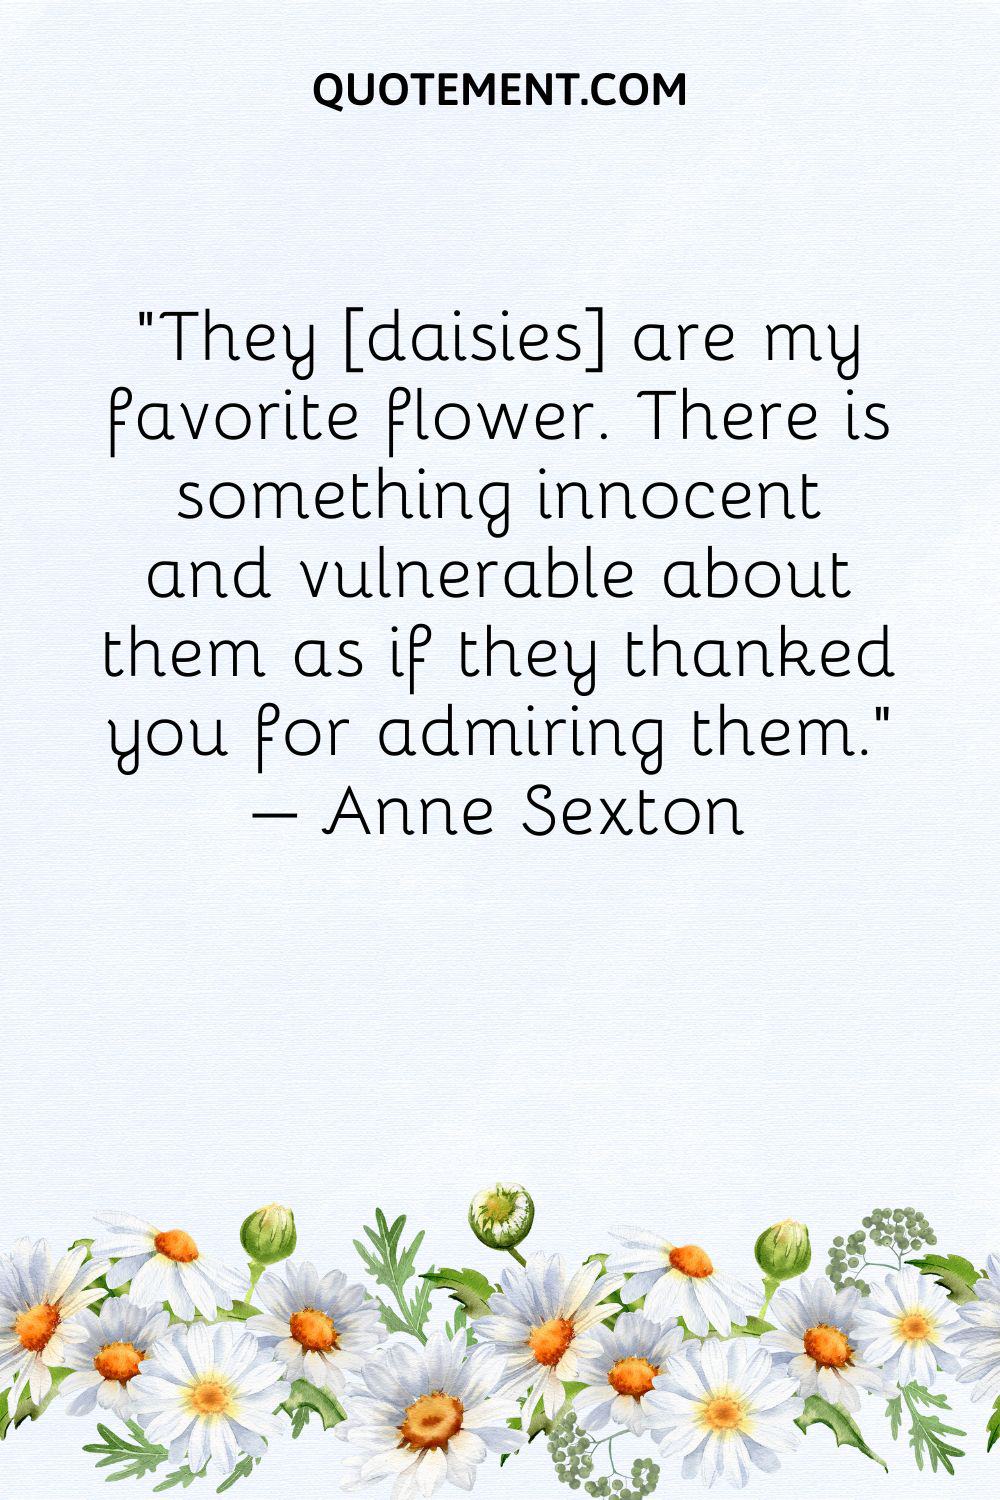 They [daisies] are my favorite flower.